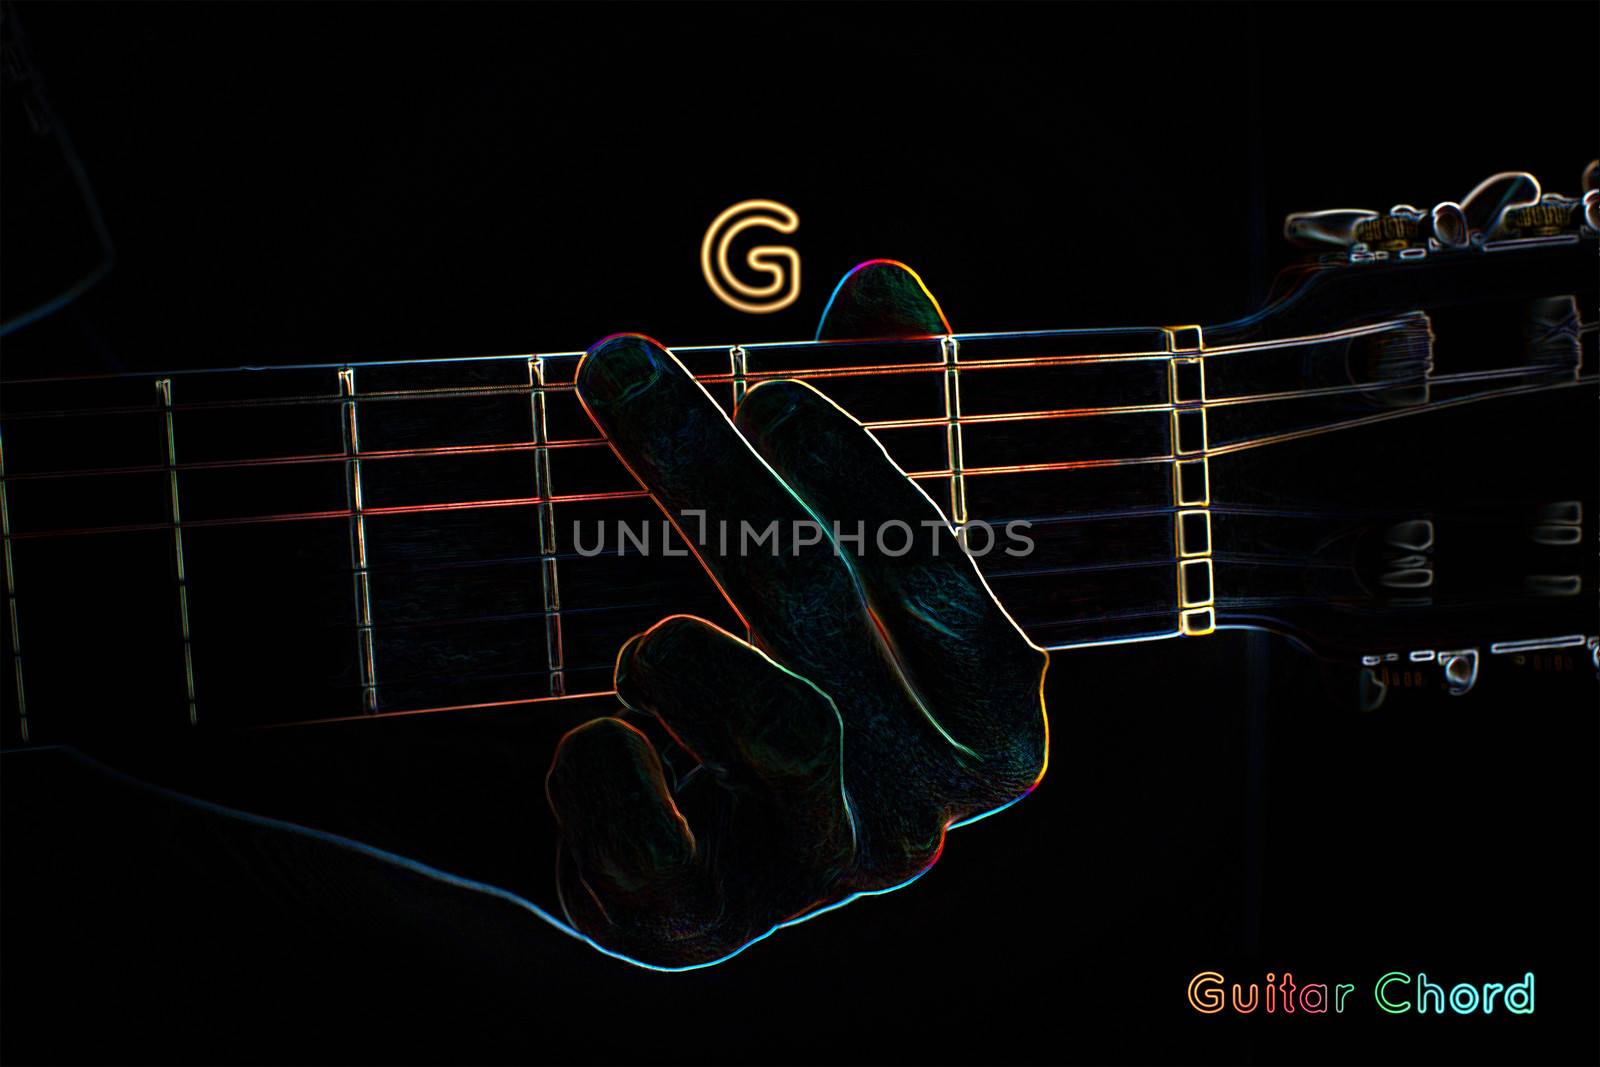 Guitar chord on a dark background, stylized illustration of an X-ray.